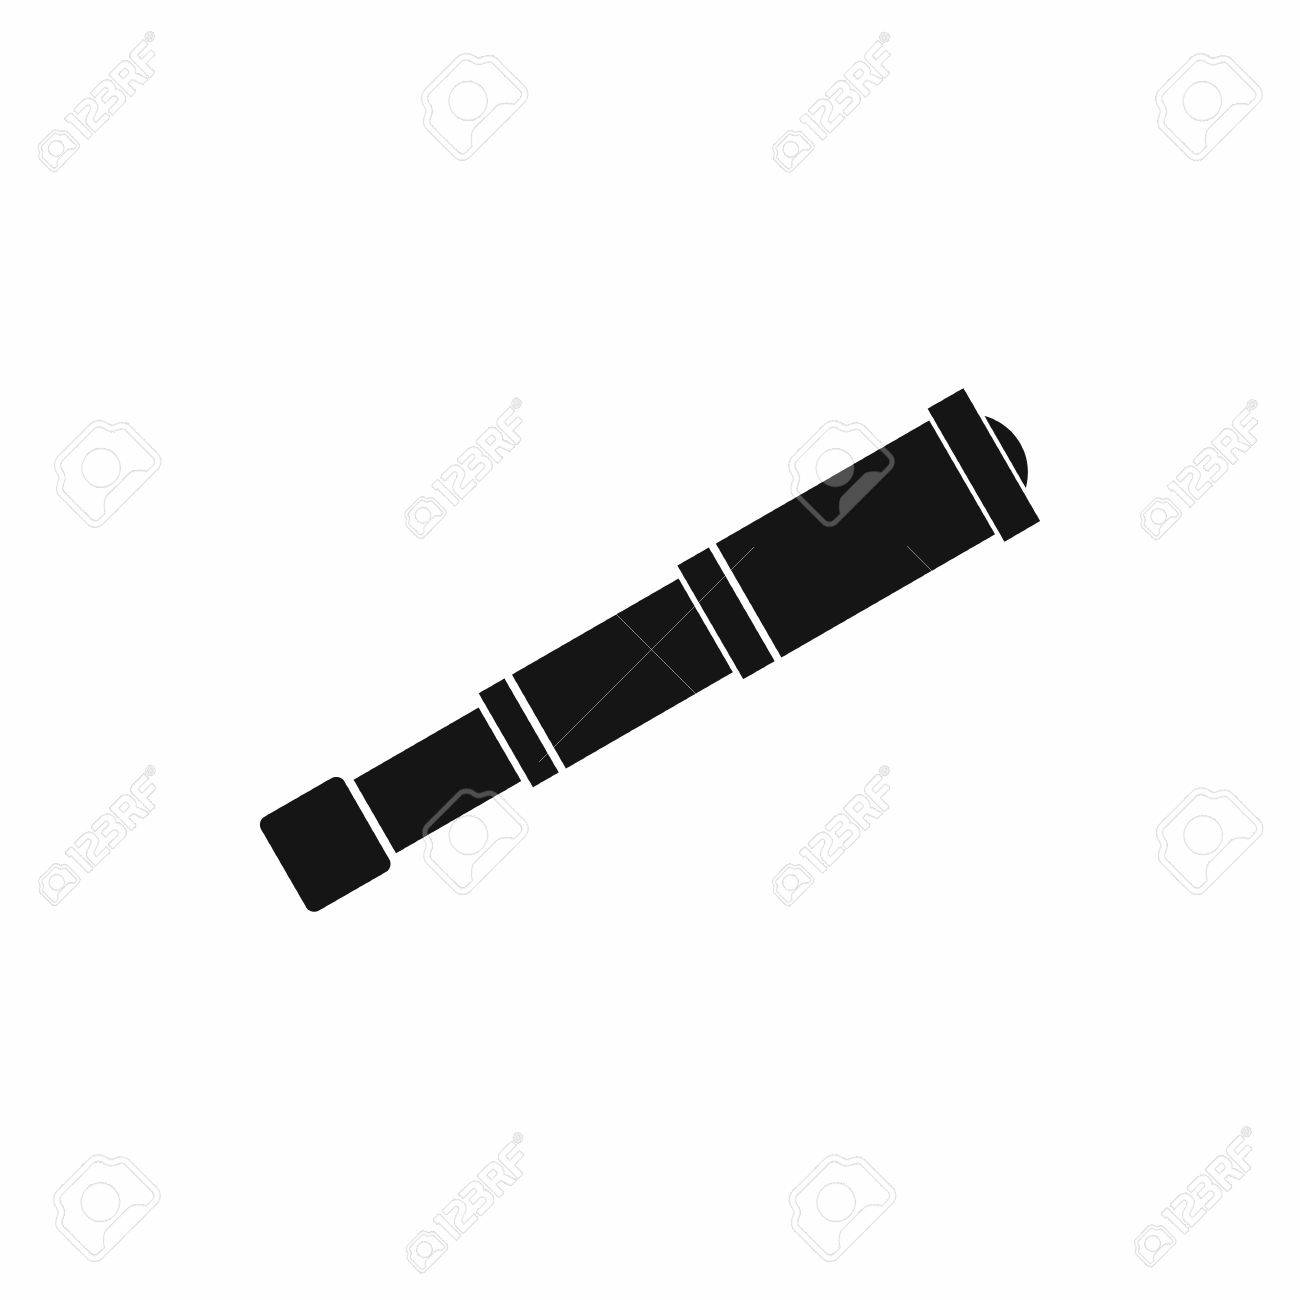 Spyglass Icon In Simple Style Isolated On White Background